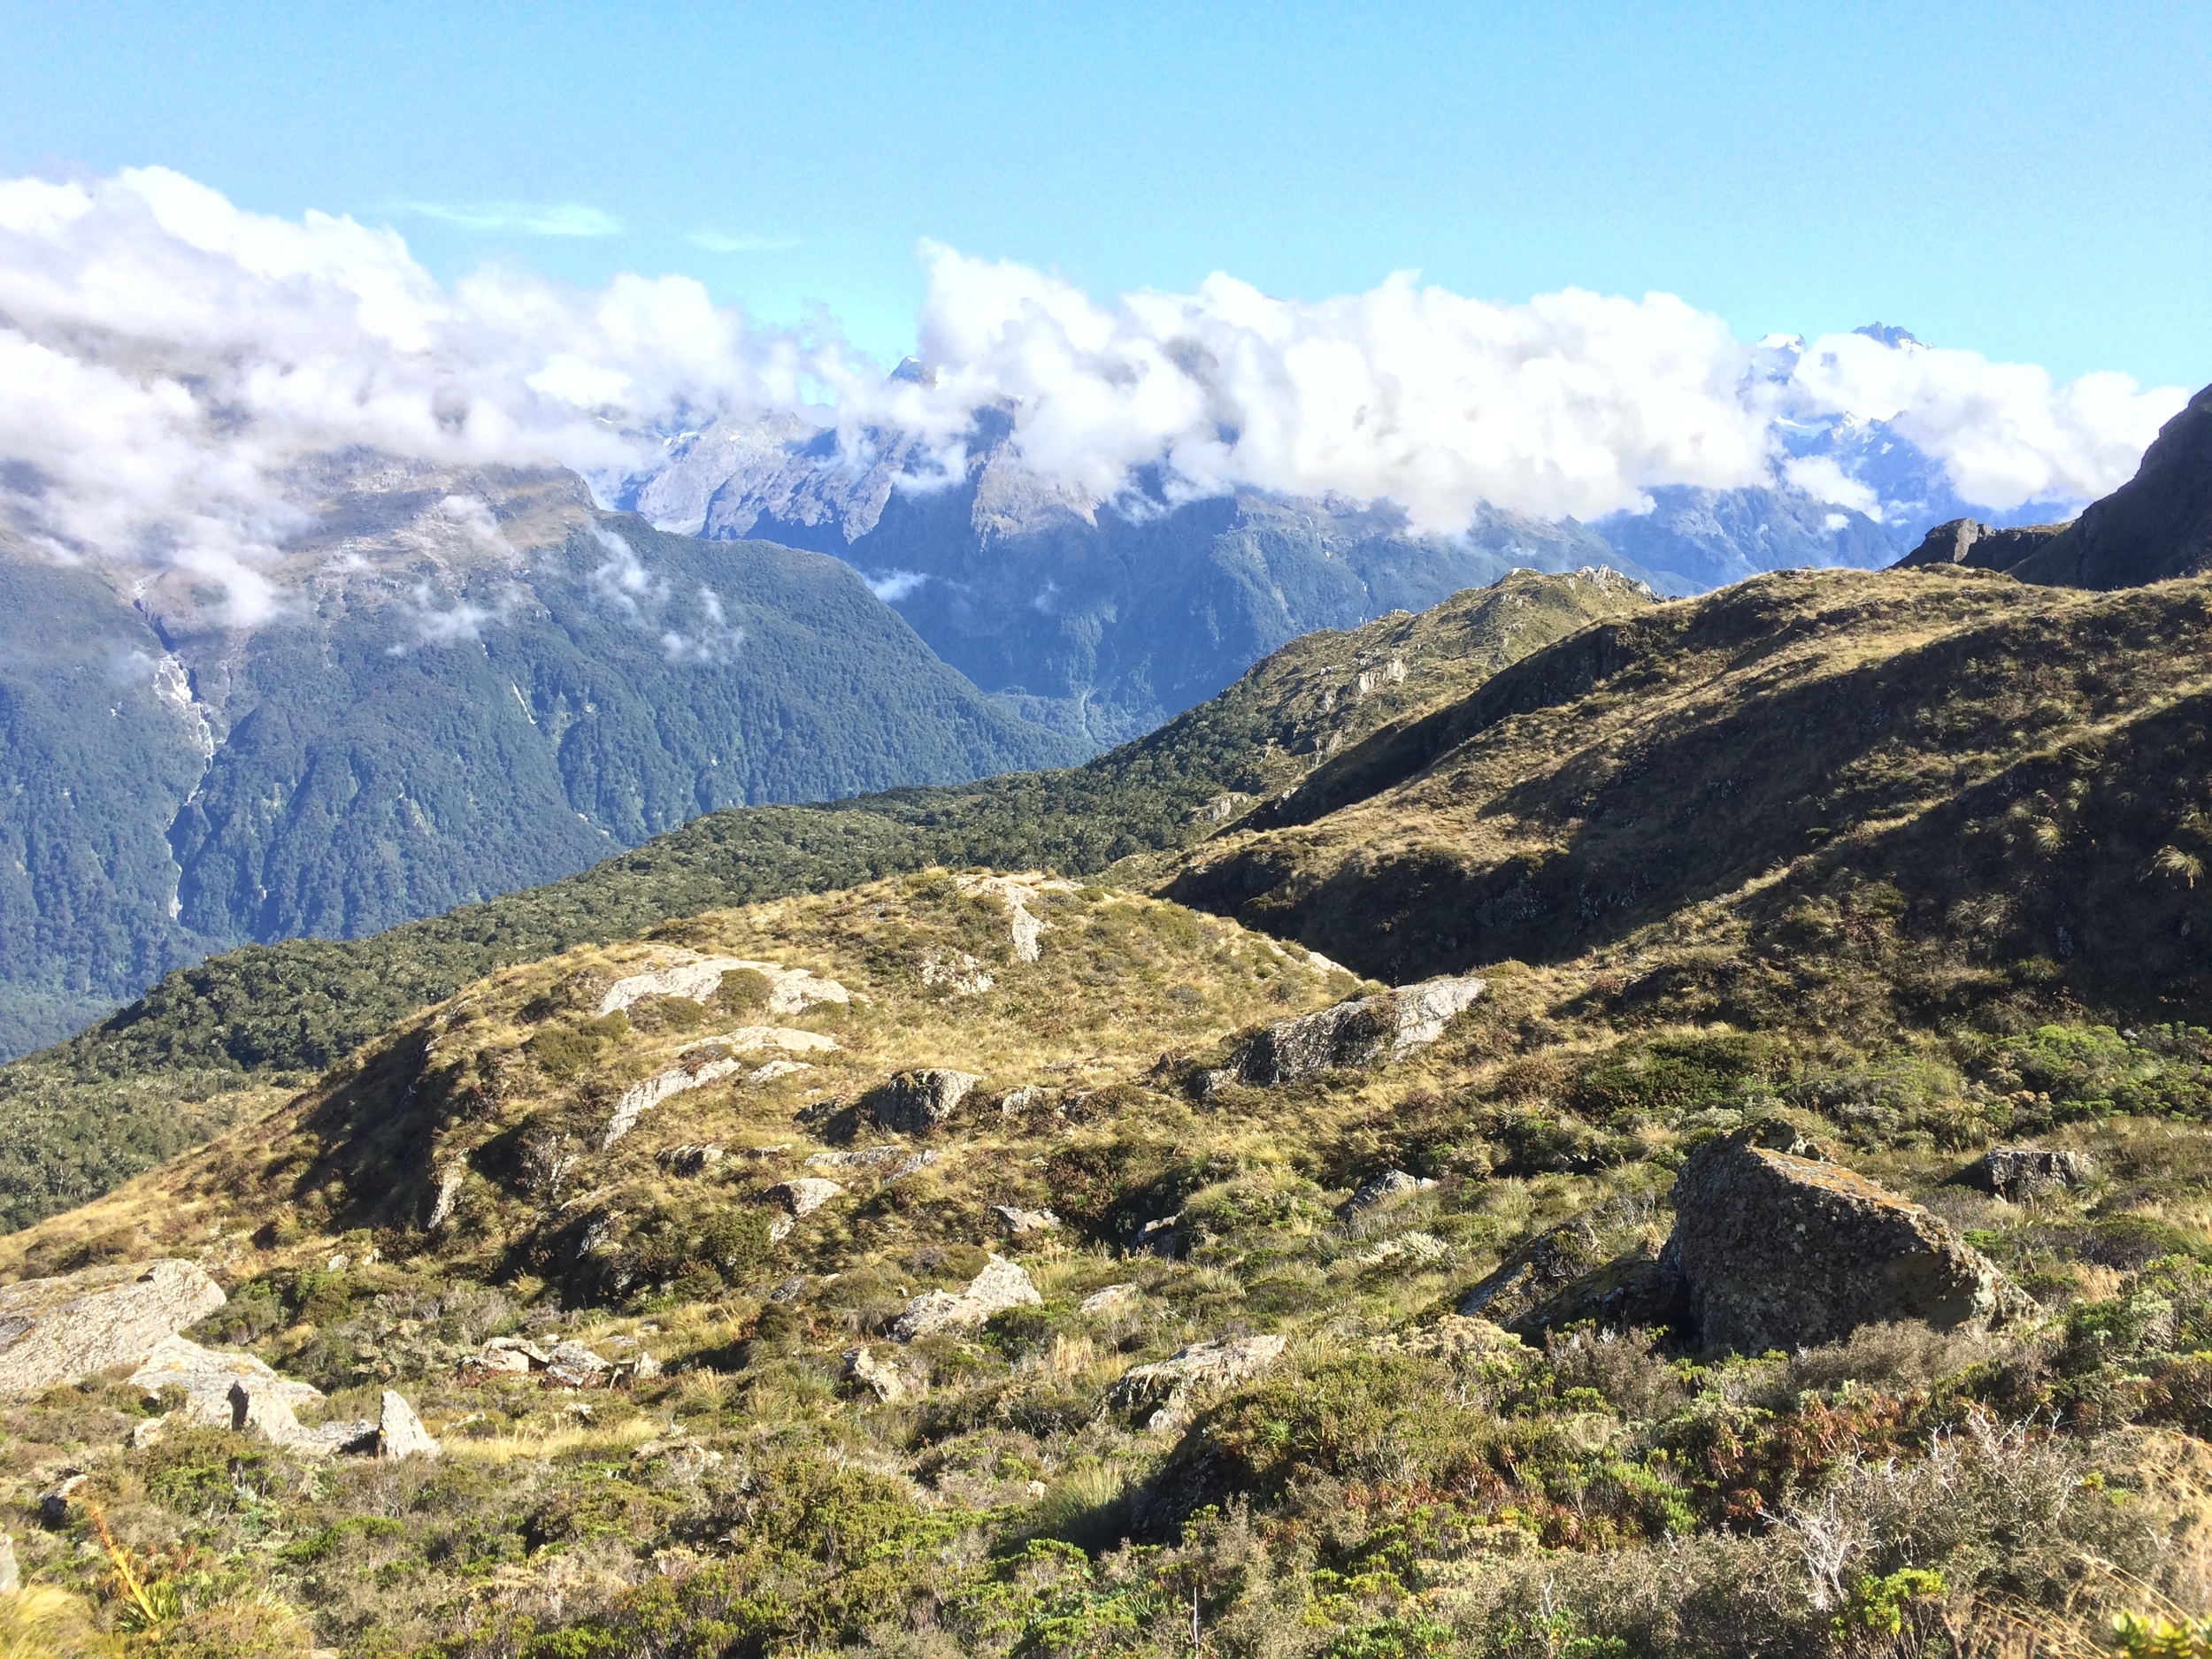 Hiking through the Routeburn. I swear this is where they chase the orcs in LOTR.